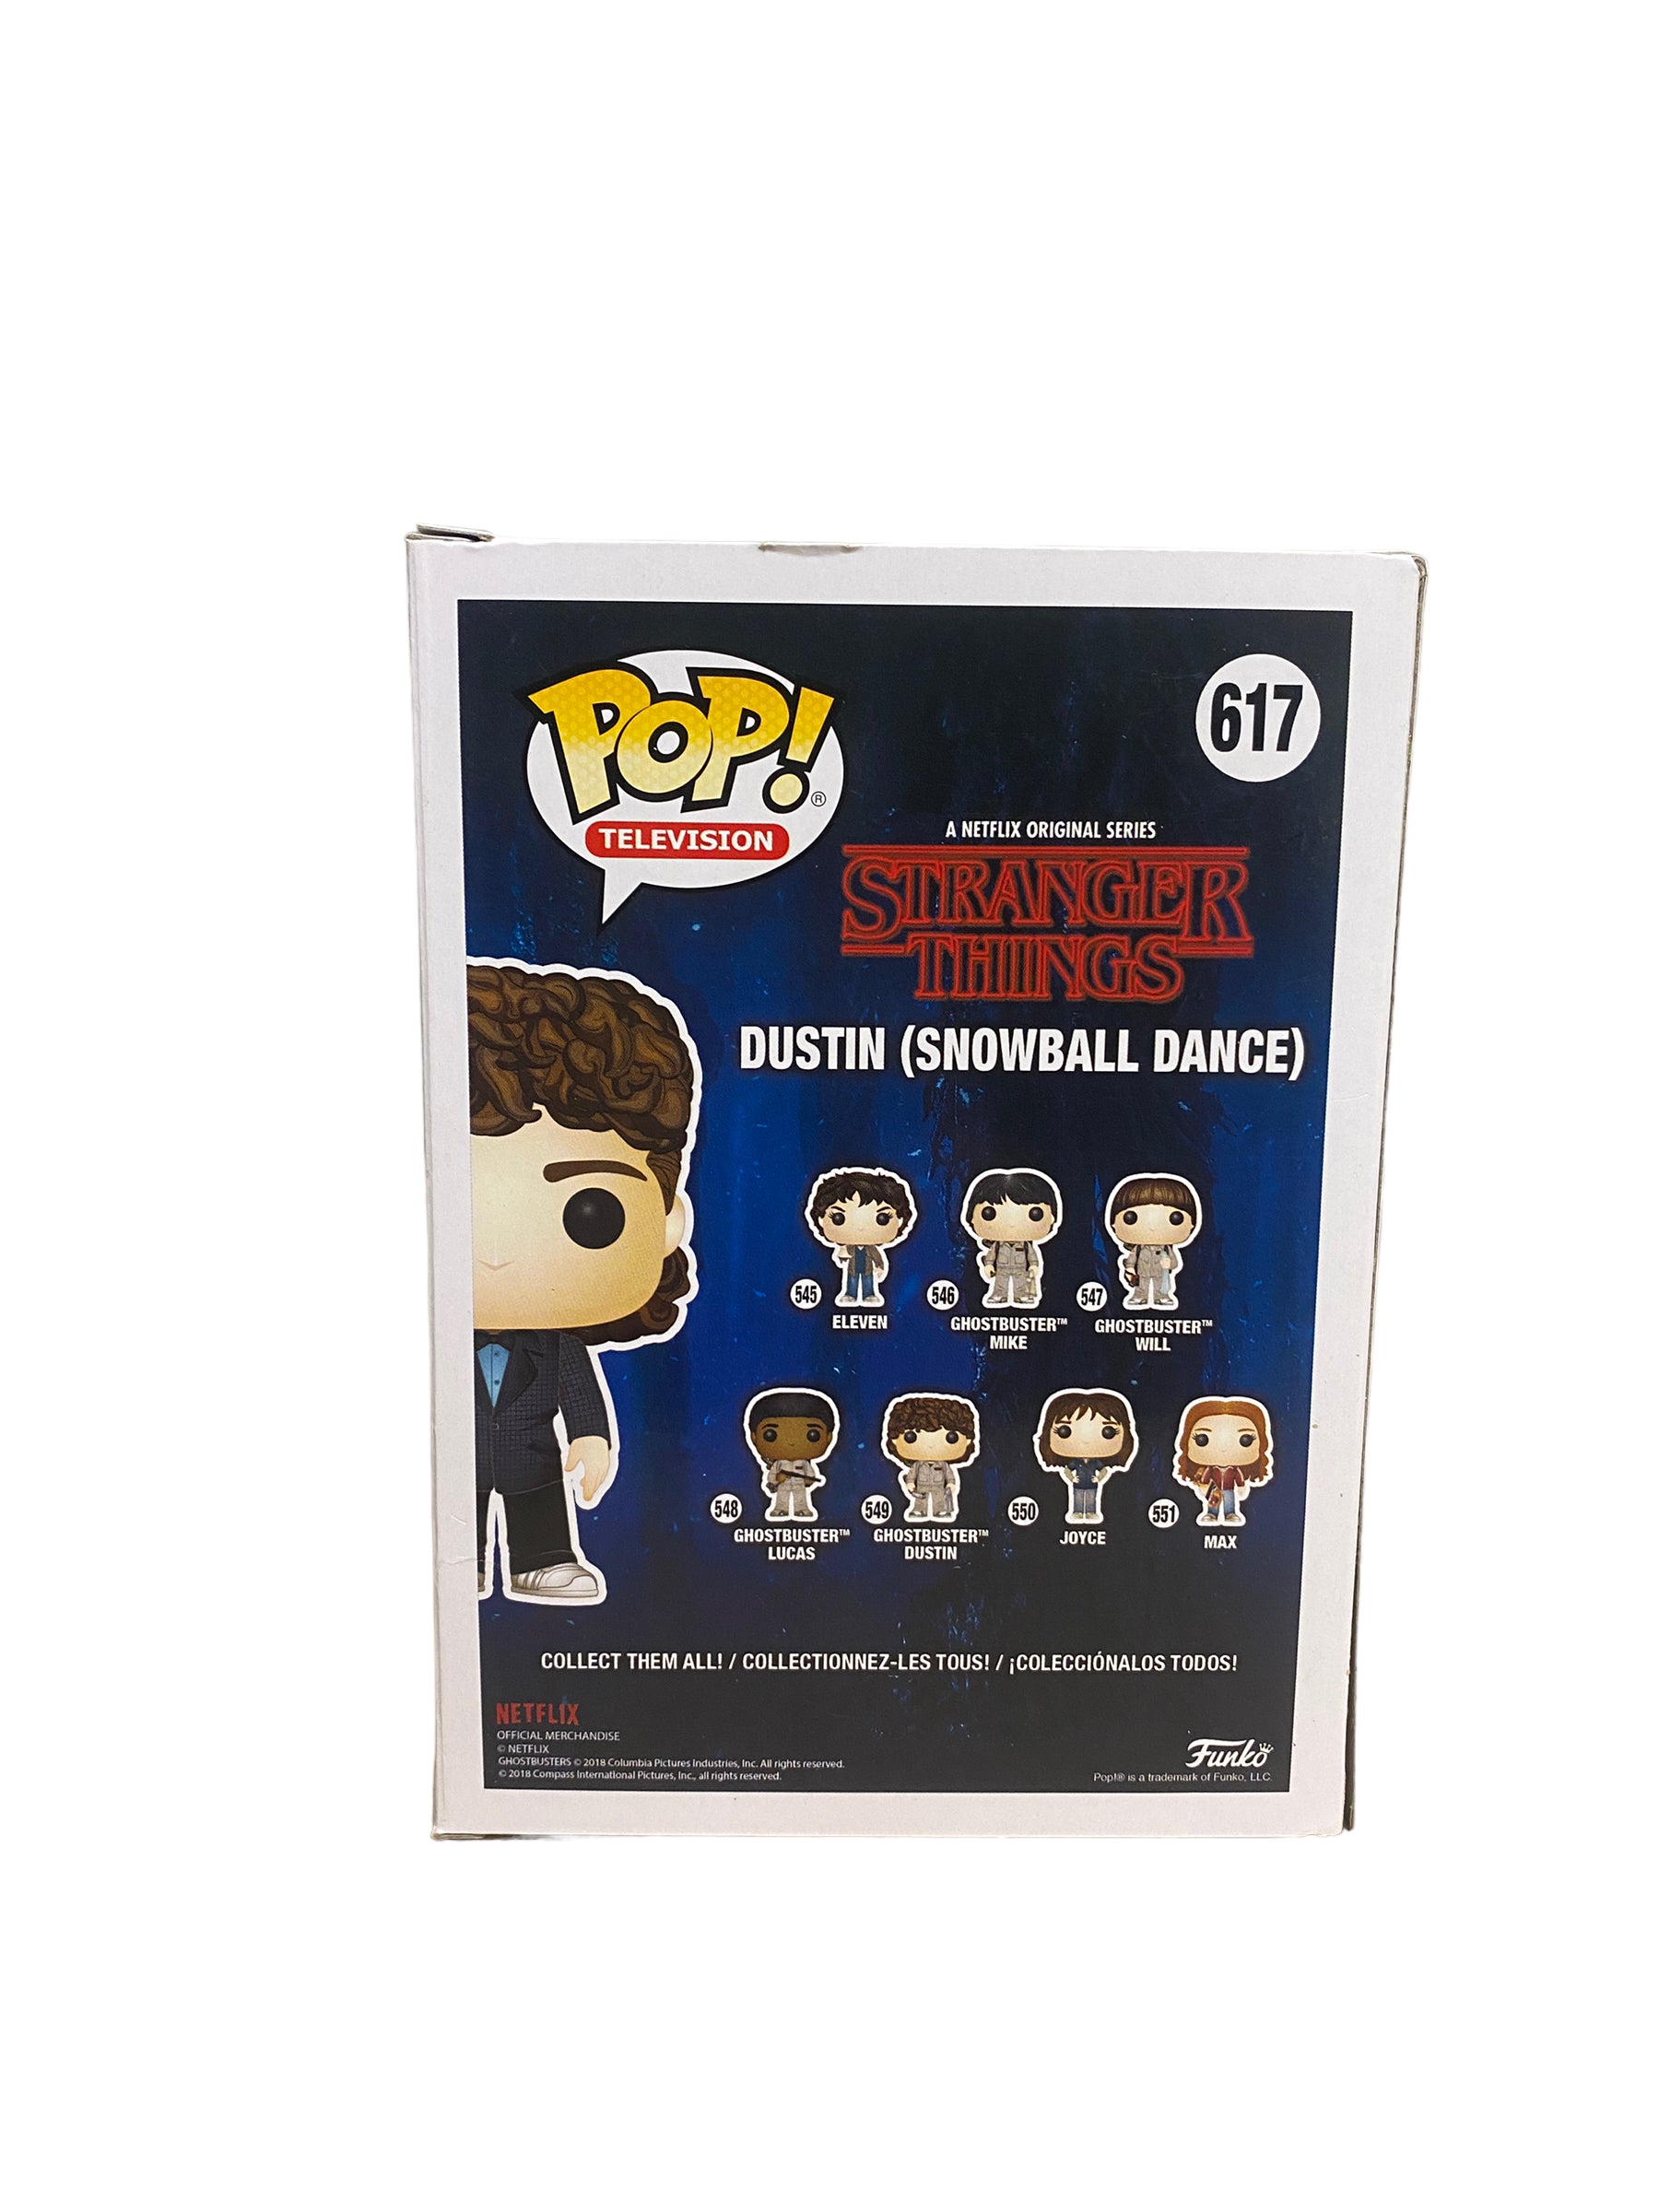 Dustin (Snowball Dance) #617 Funko Pop! - Stranger Things - SDCC 2018 Shared Exclusive - Condition 8.5/10